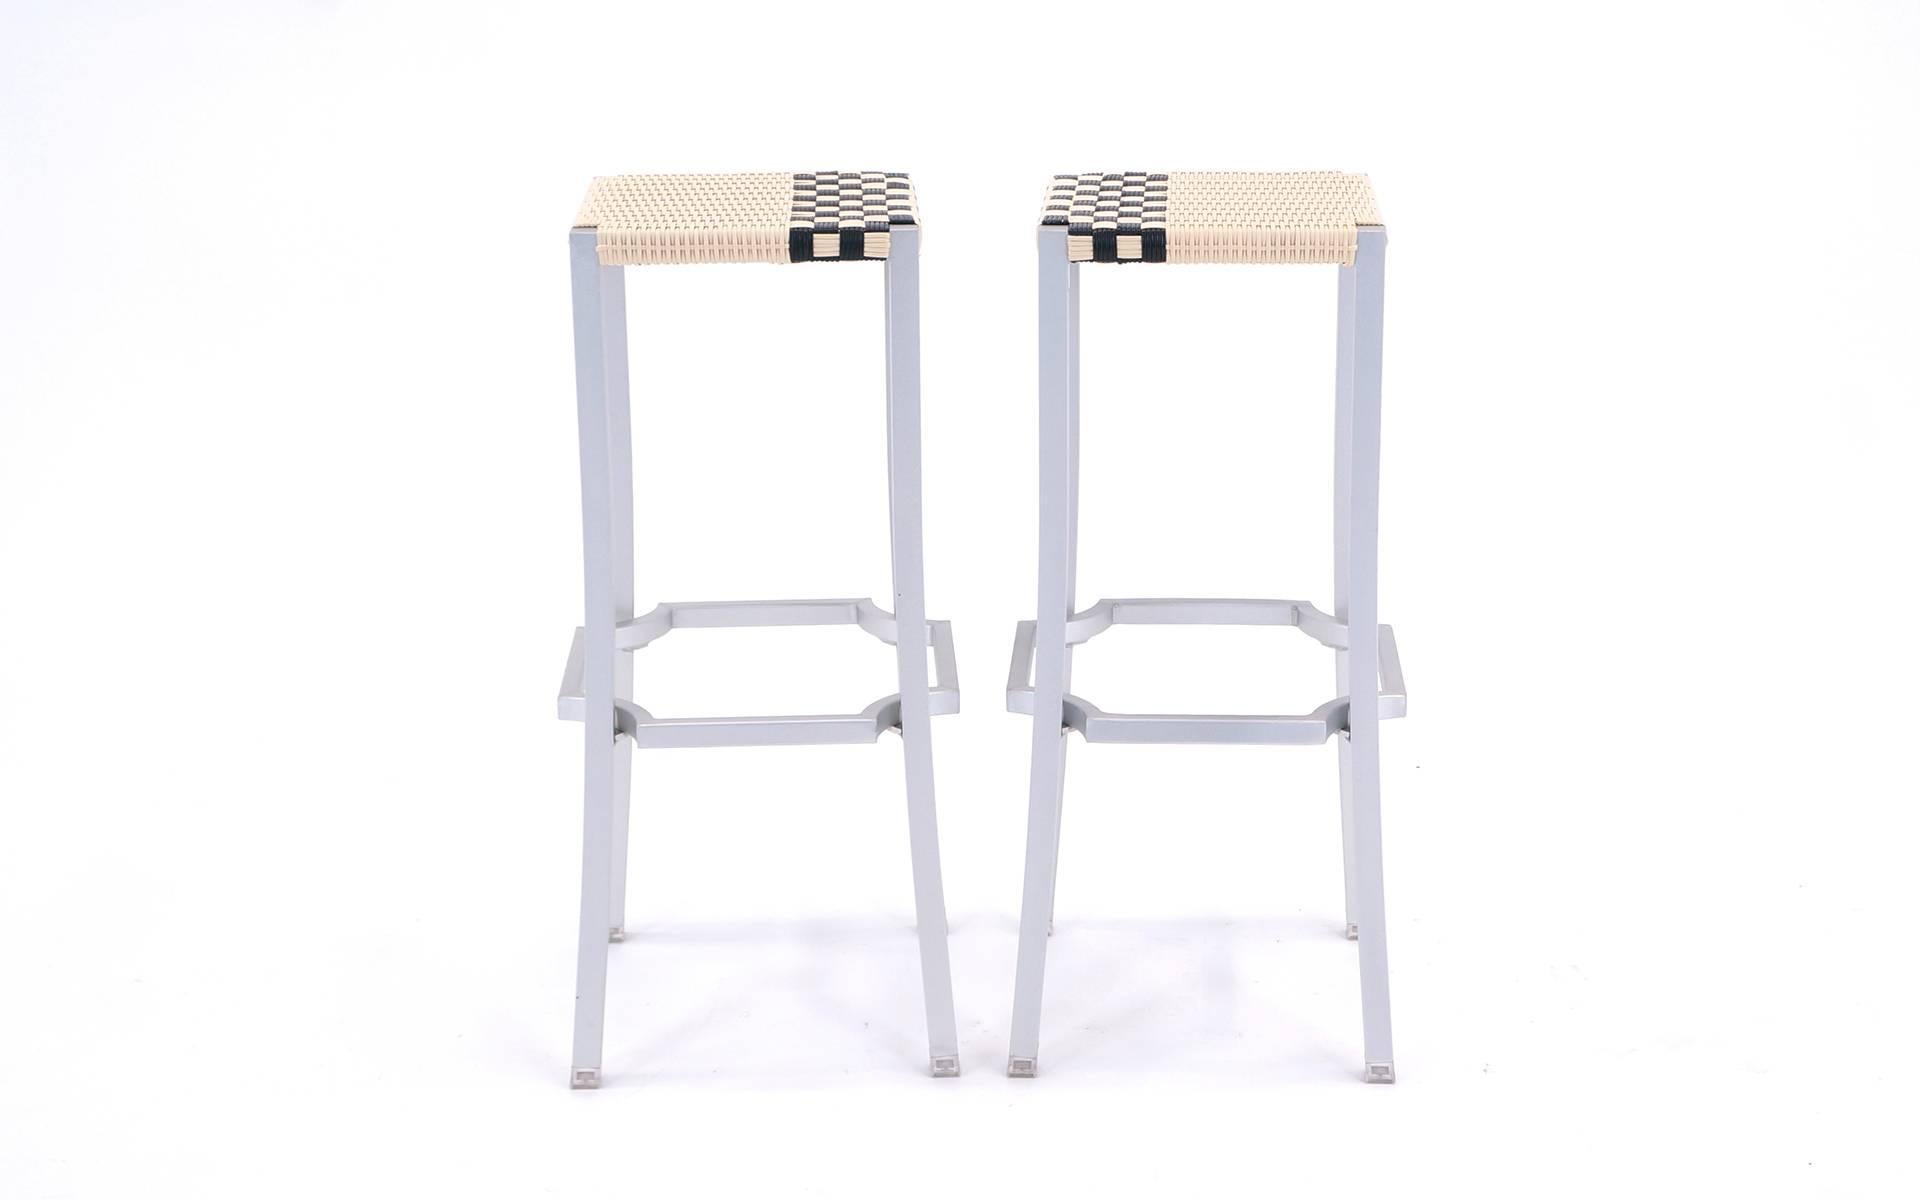 Pair of never used One Cafe bar stools designed by Philippe Starck in 2006 for Driade, Italy. The stool structure is sandblasted anodized polished aluminium with seat in woven plastic in ivory and black. It can be used indoor as well as outdoor.